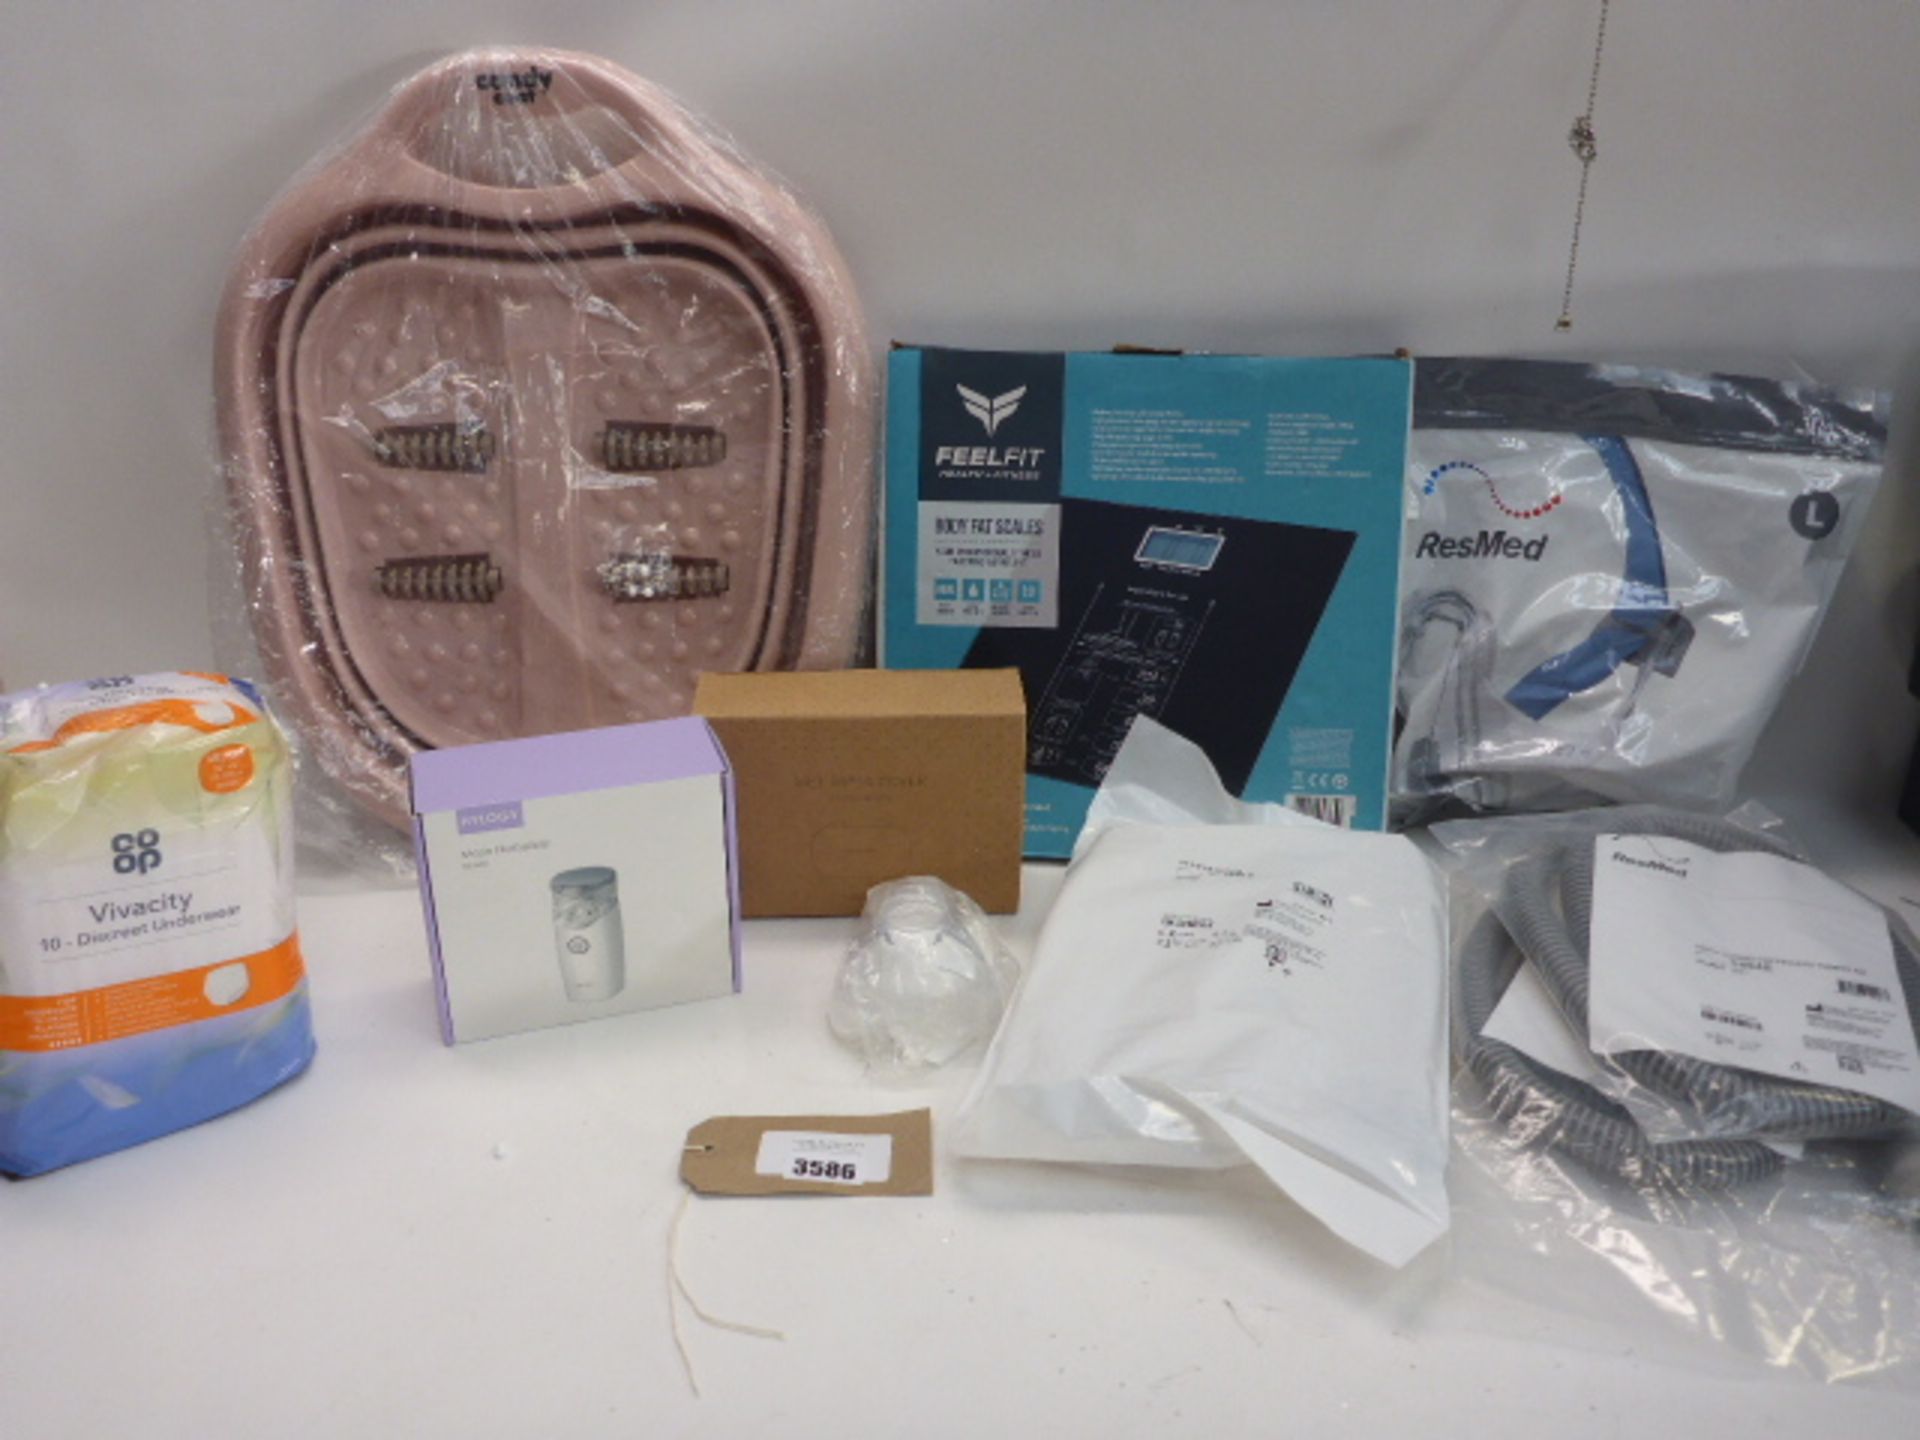 Candy Coat foot massager, Feel Fit body fat scales, ResMed face mask & tubing, discreet underwear,